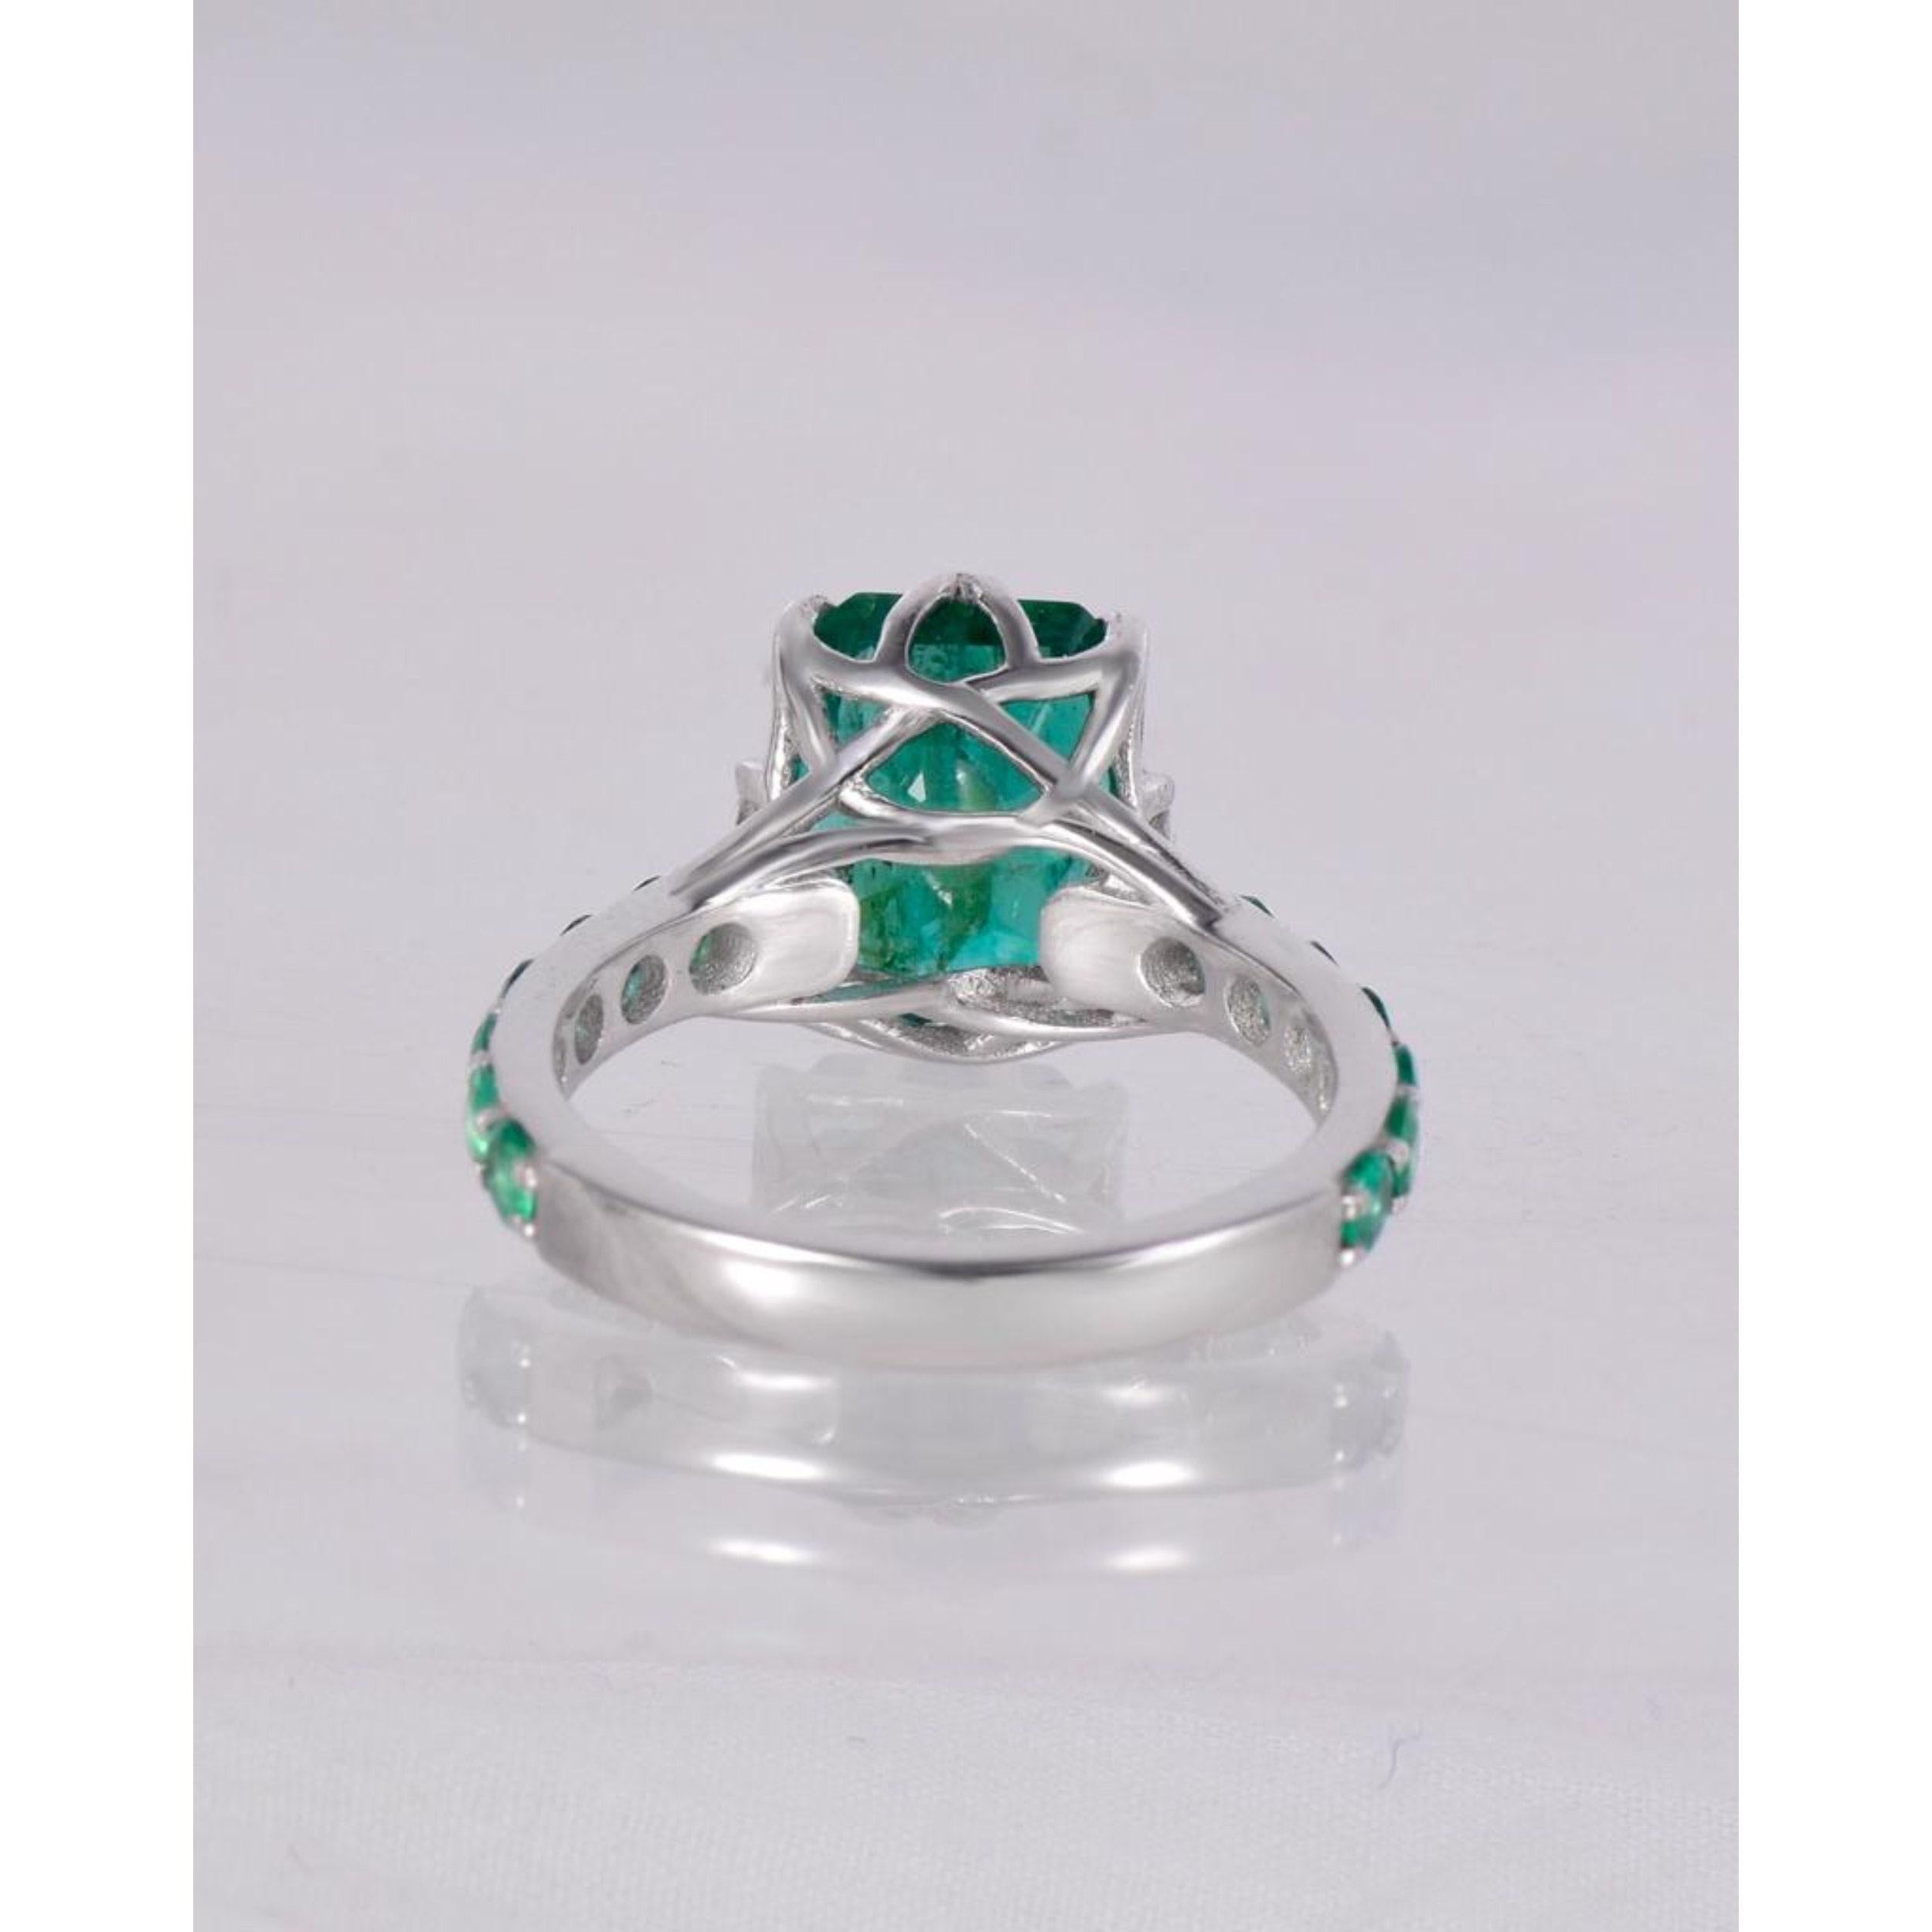 For Sale:  3 Carat Emerald Statement Ring, Natural Emerald Engagement Ring 6